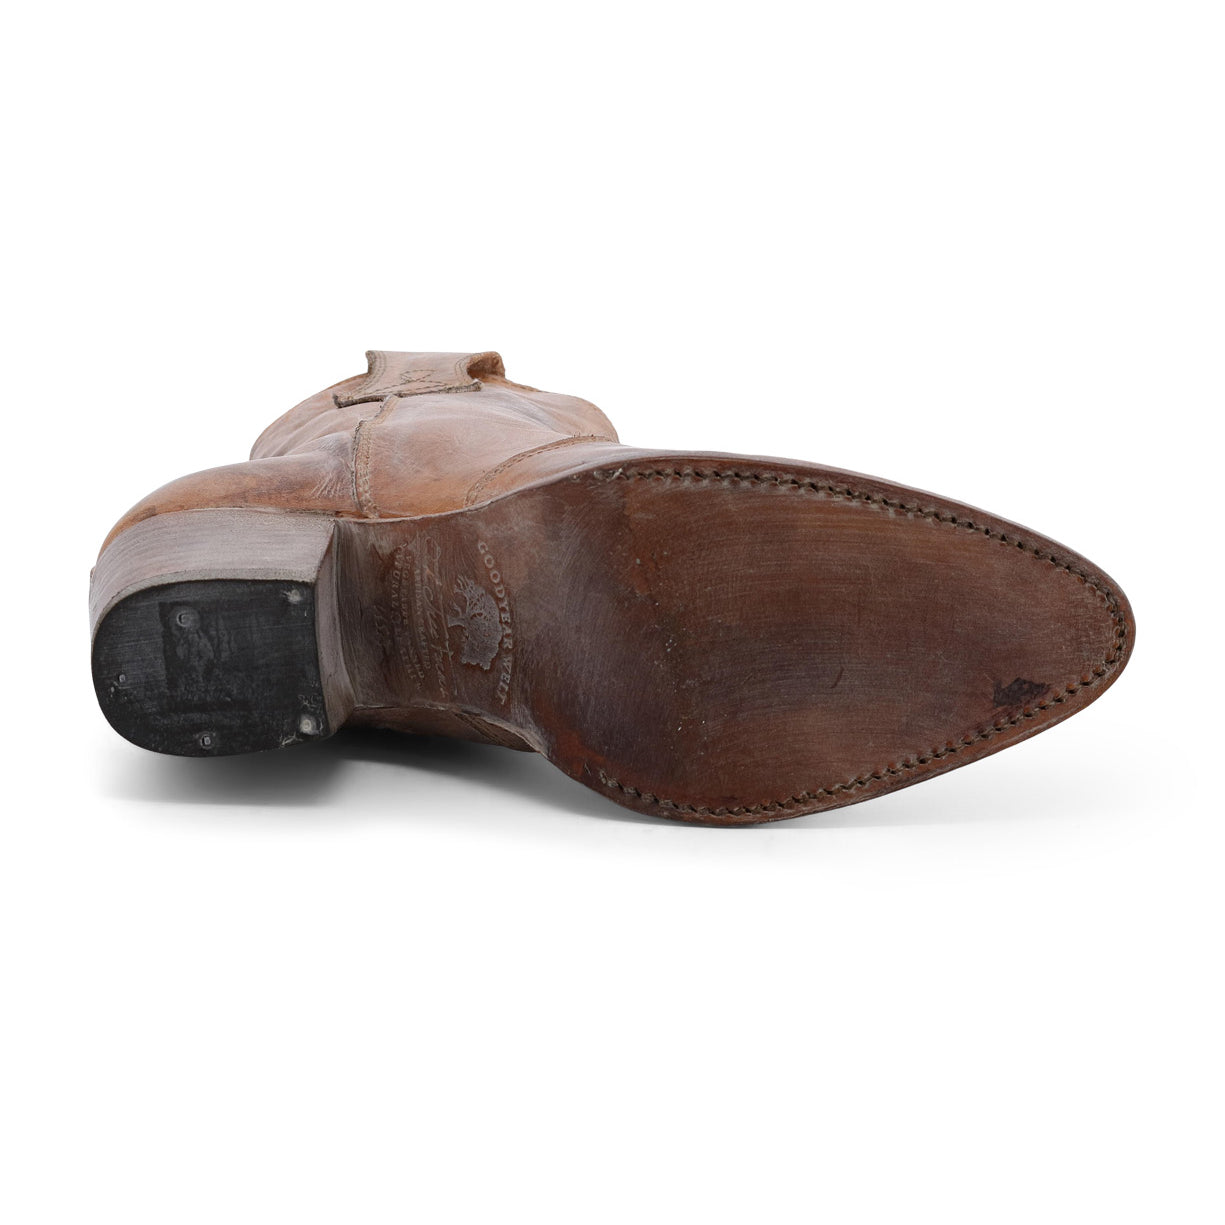 A pair of Oak Tree Farms "Baila" brown leather boots with a buckle on the side.